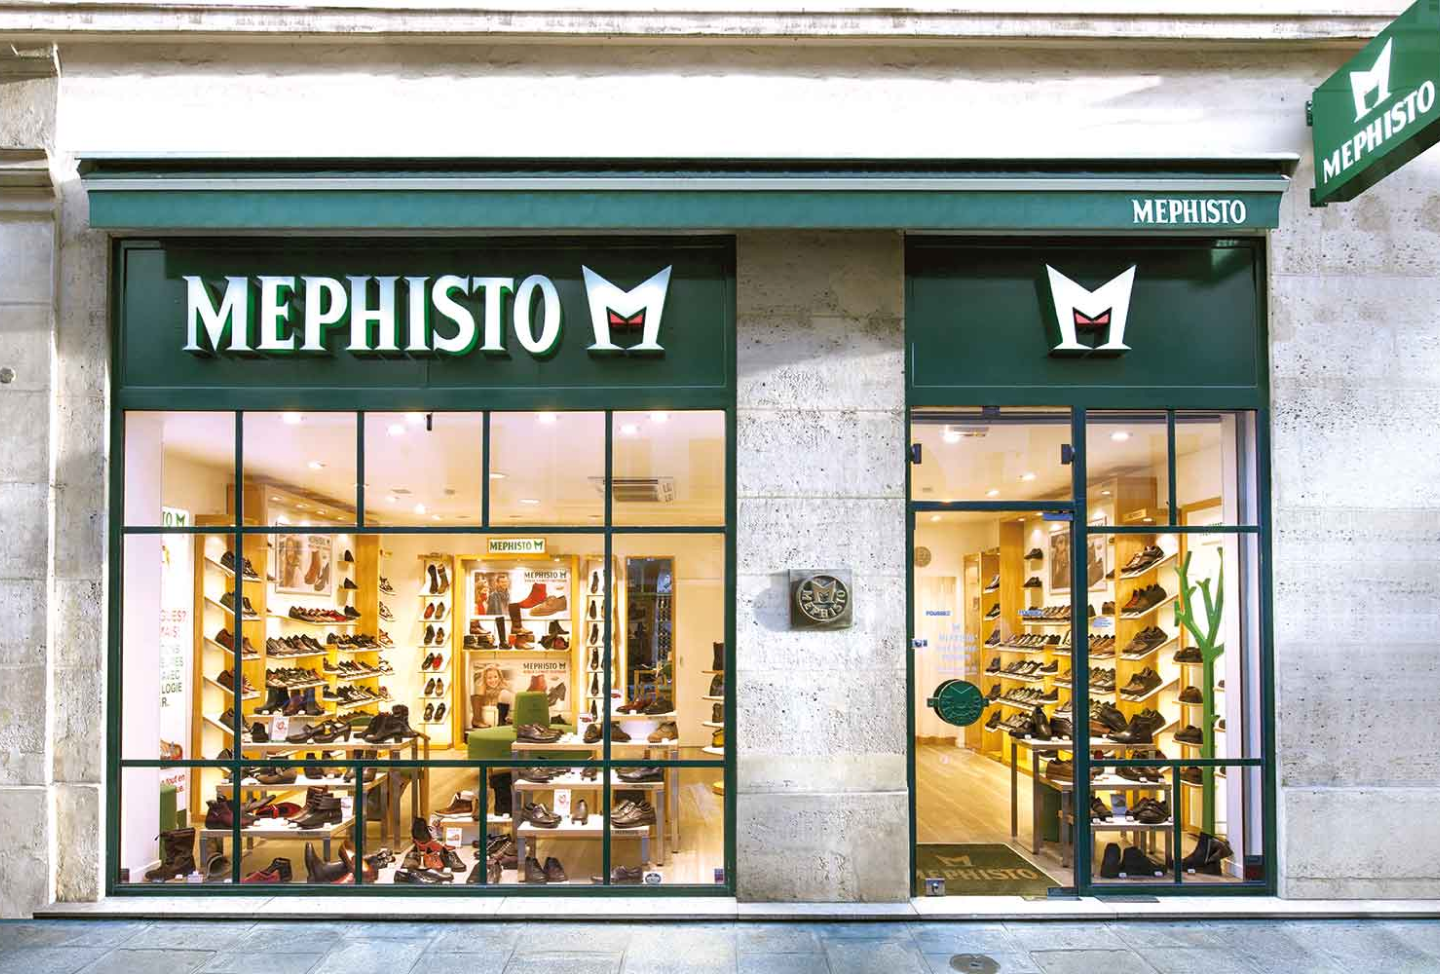 About Mephisto Shoes